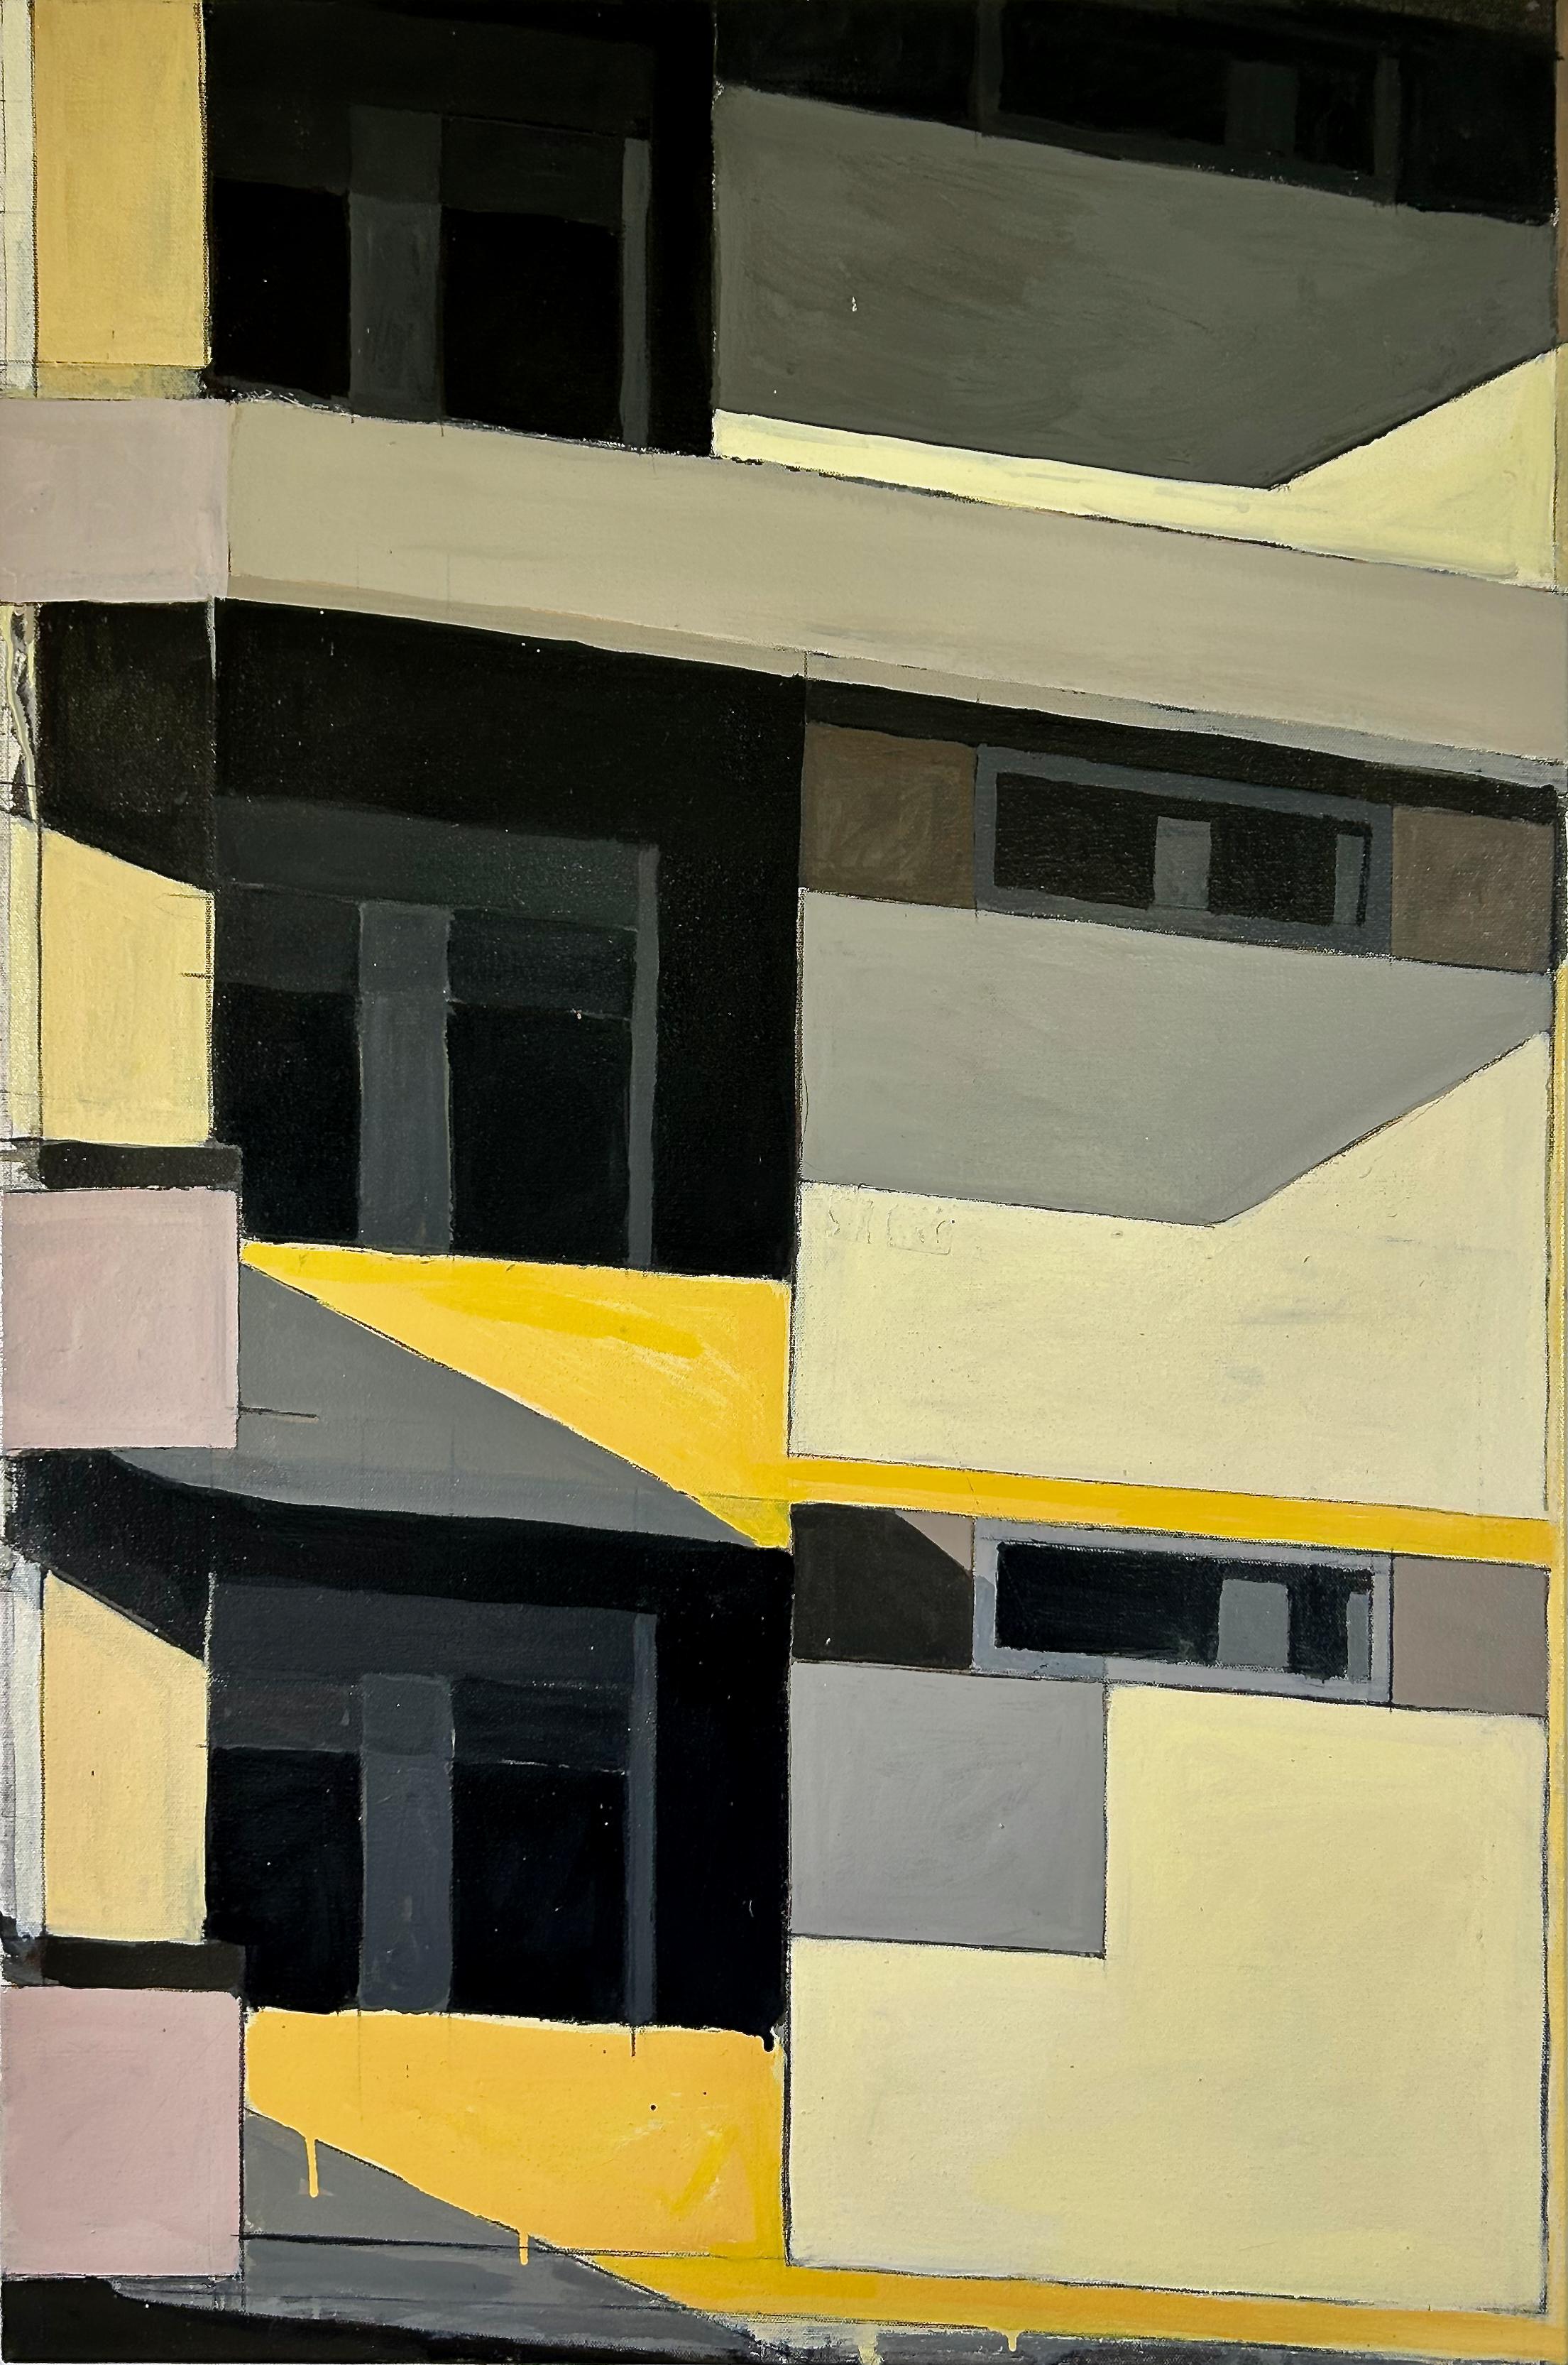 Ospedale II (Abstract Mid Century Modern, Building Facade in Black & Yellow) - Painting by Anthony Finta